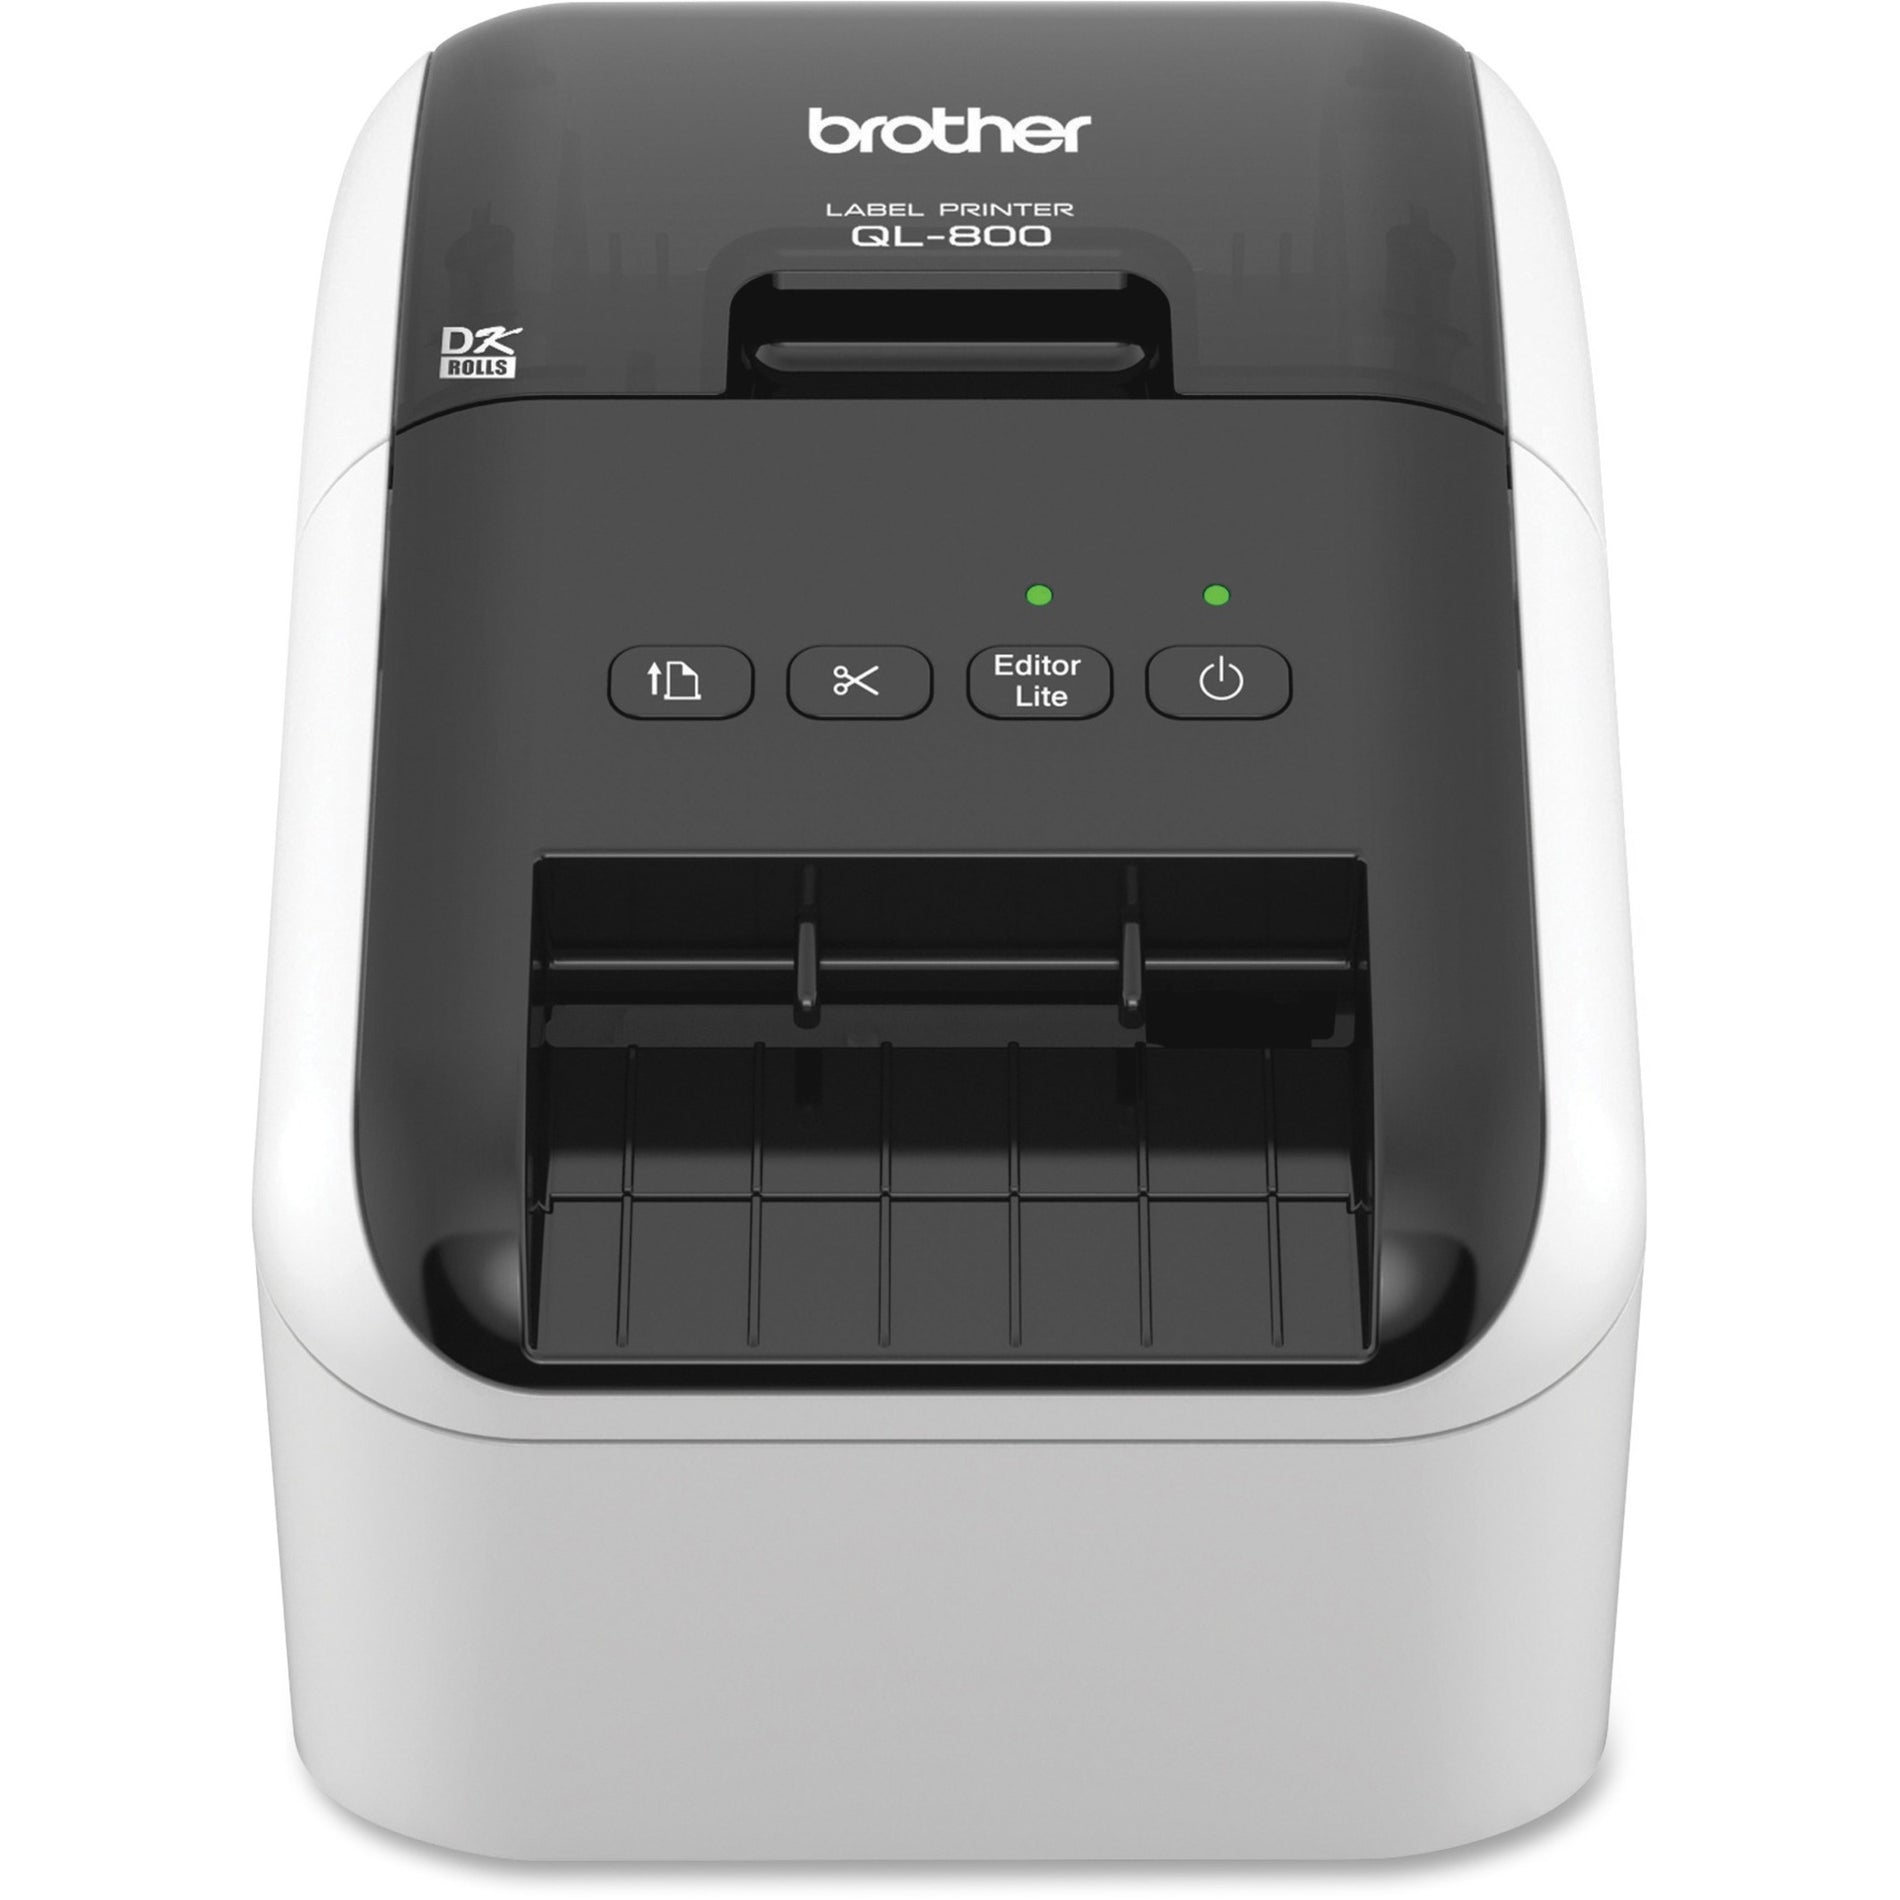 Brother QL800 Label Printer, Direct Thermal, Monochrome, 2.44" Roll, 1.6 lps, 300 x 600 dpi